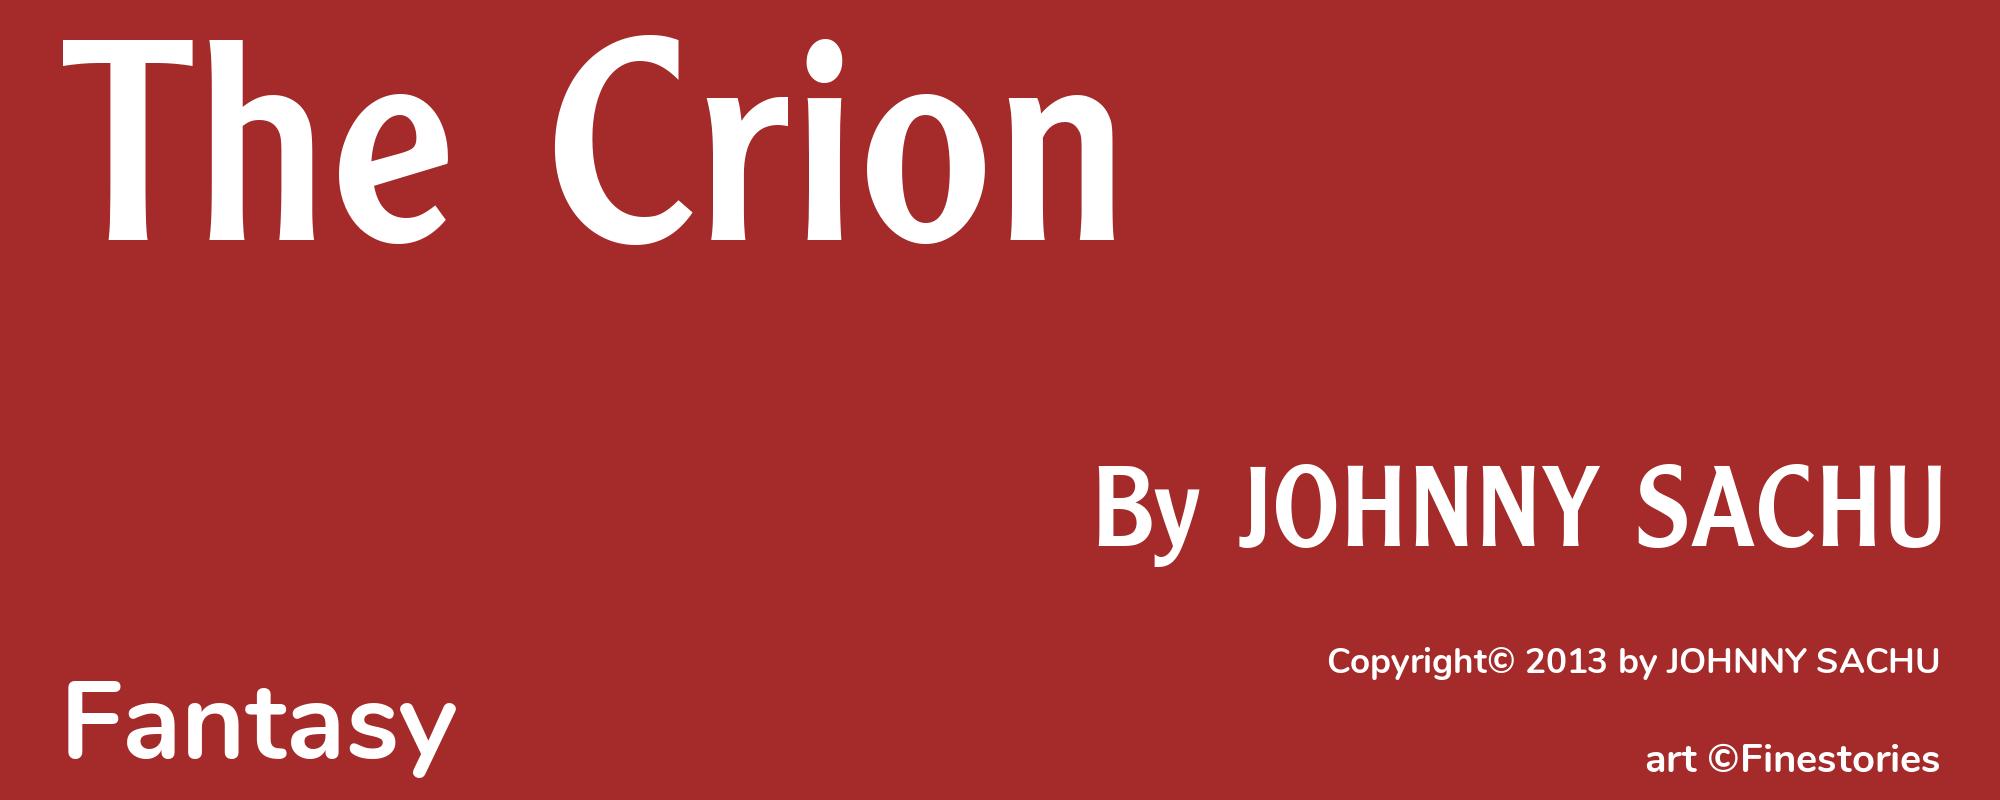 The Crion - Cover